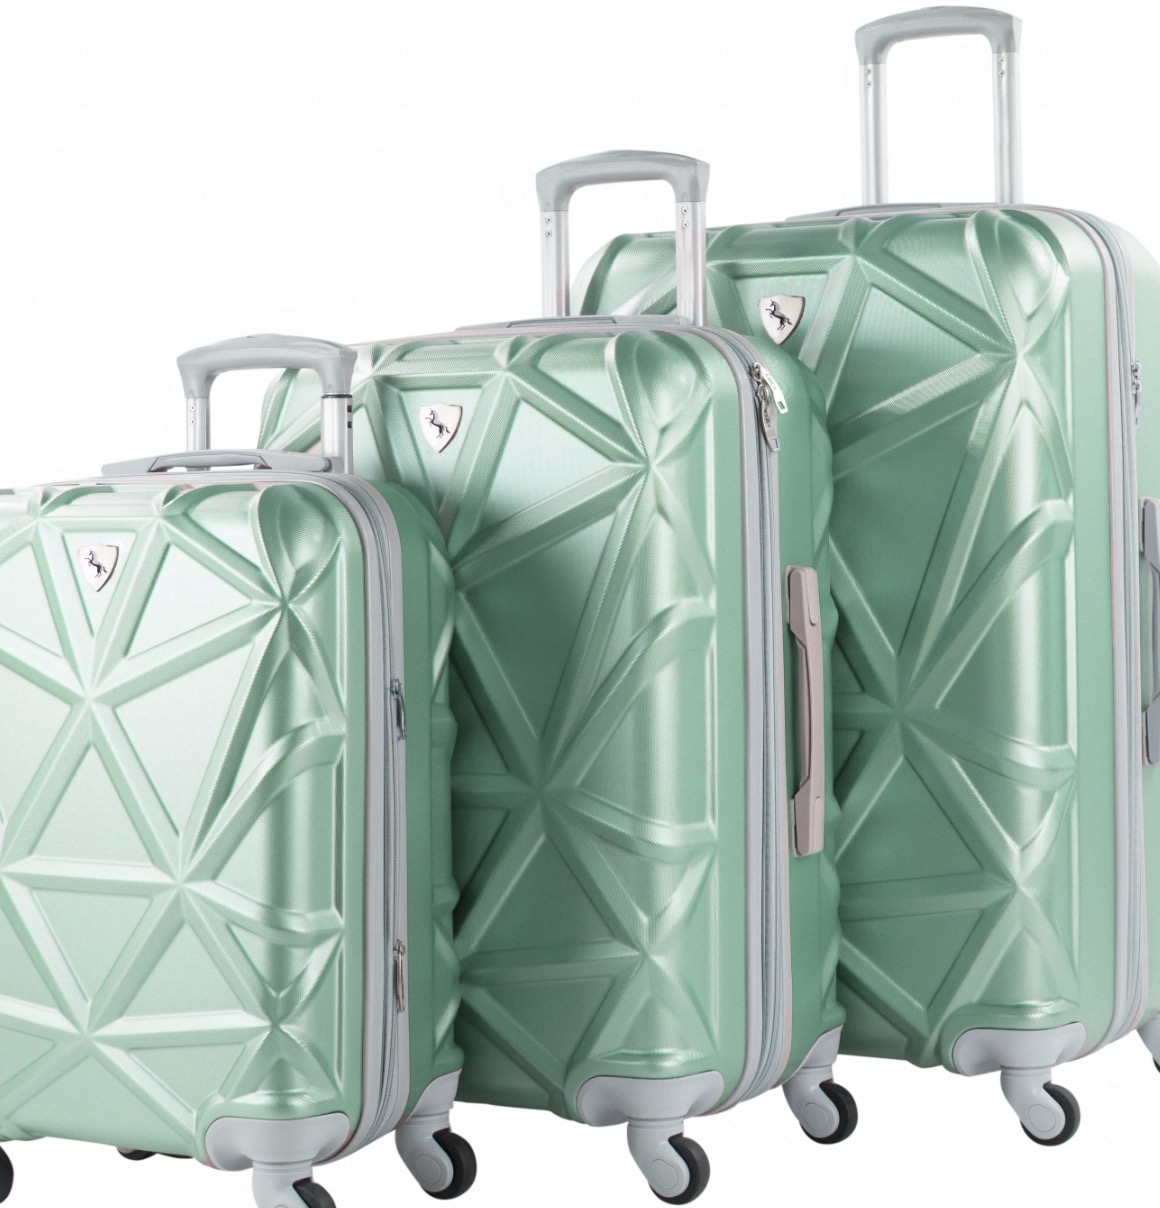 Hardside Luggage: Optimal Protection for Your Travels